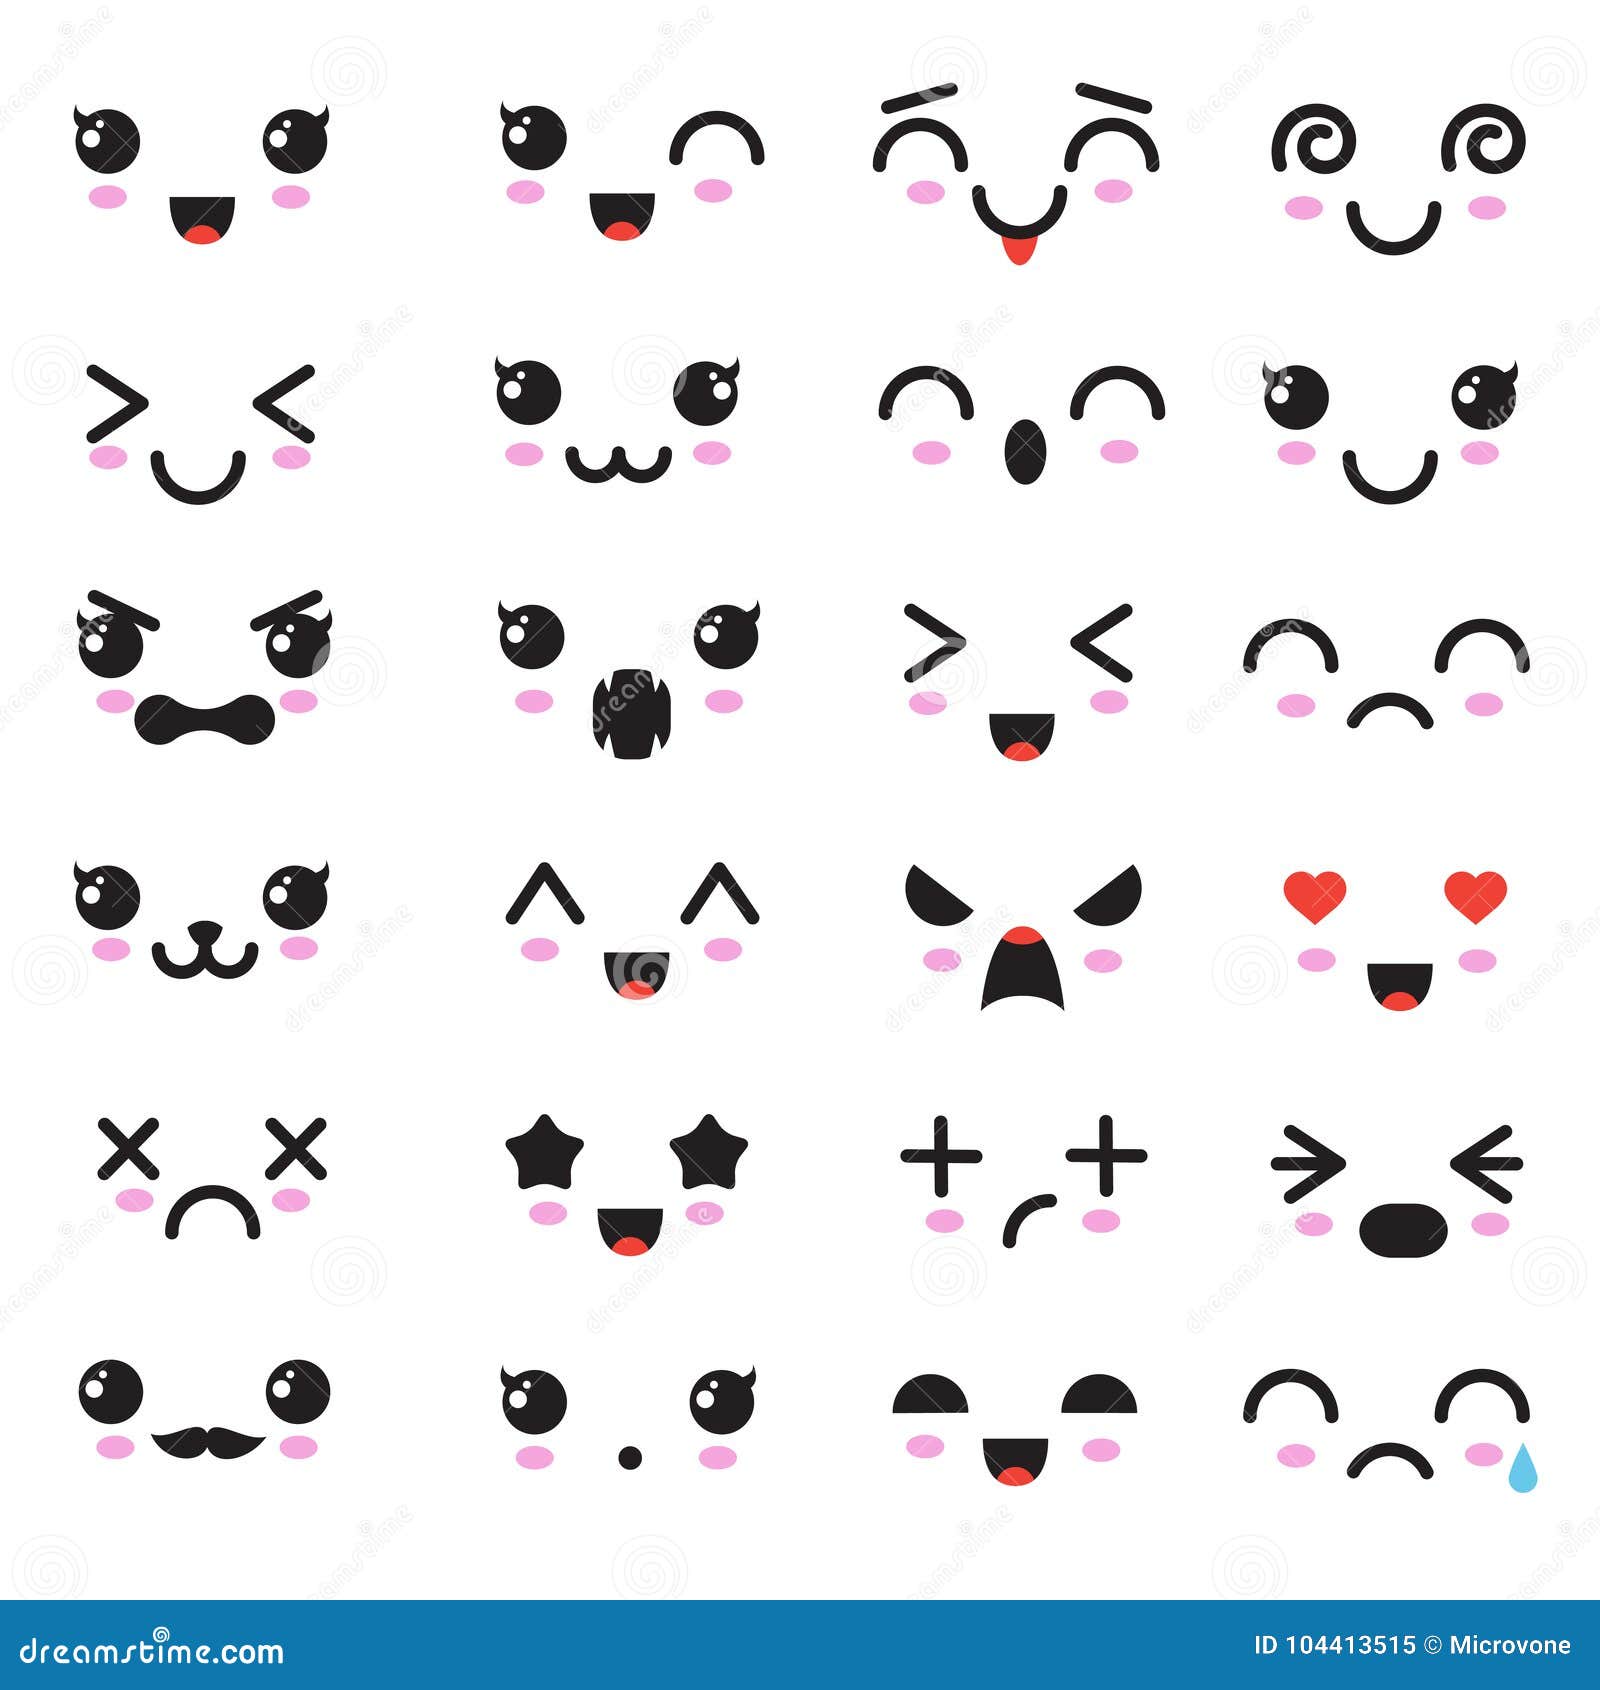 cartoon kawaii eyes and mouths. cute emoticon emoji characters in japanese style